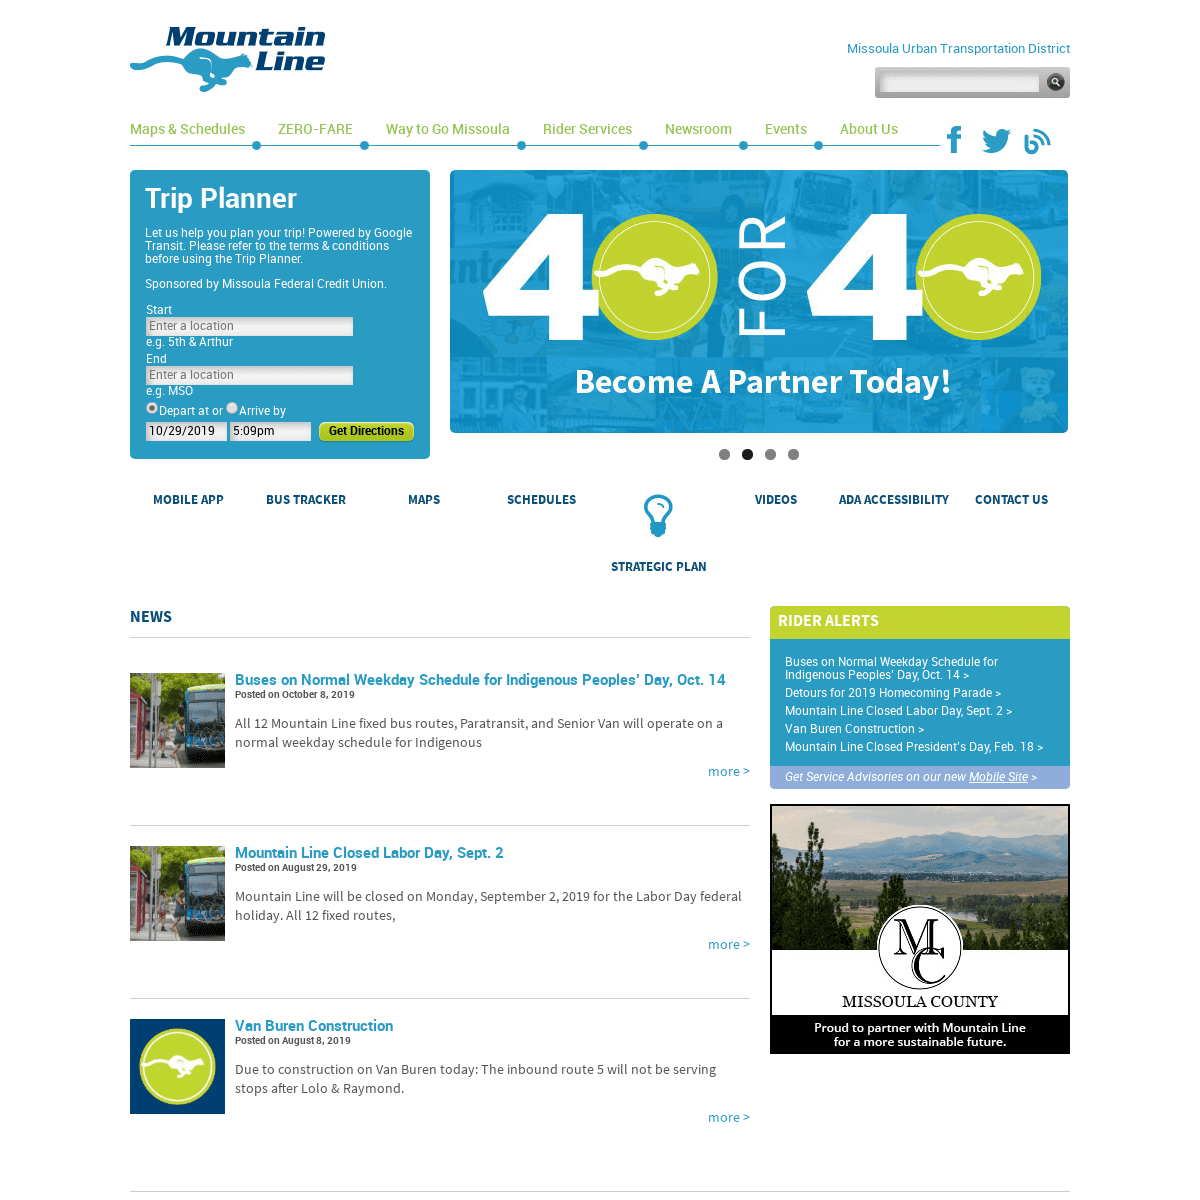 A complete backup of mountainline.com